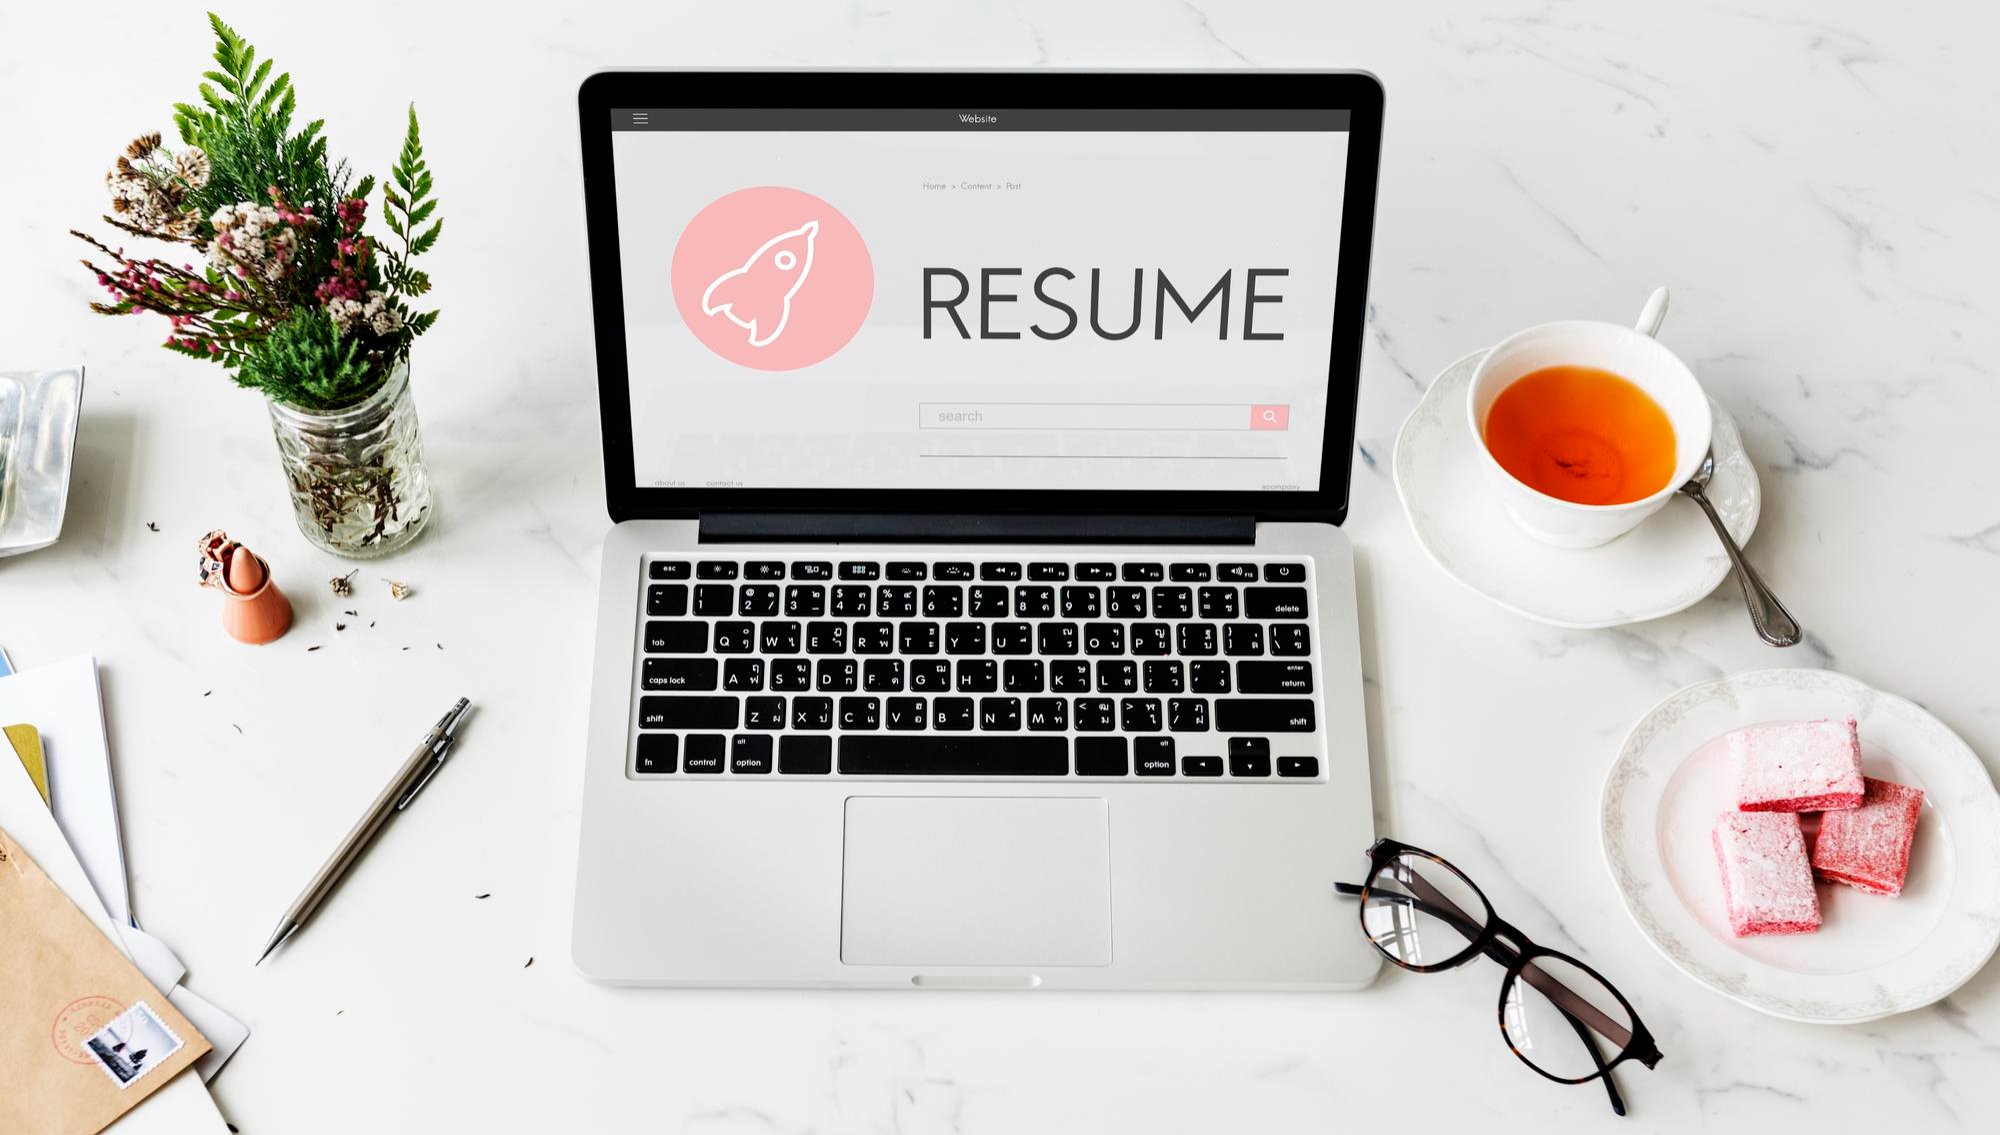 Resume new business launch plan concept